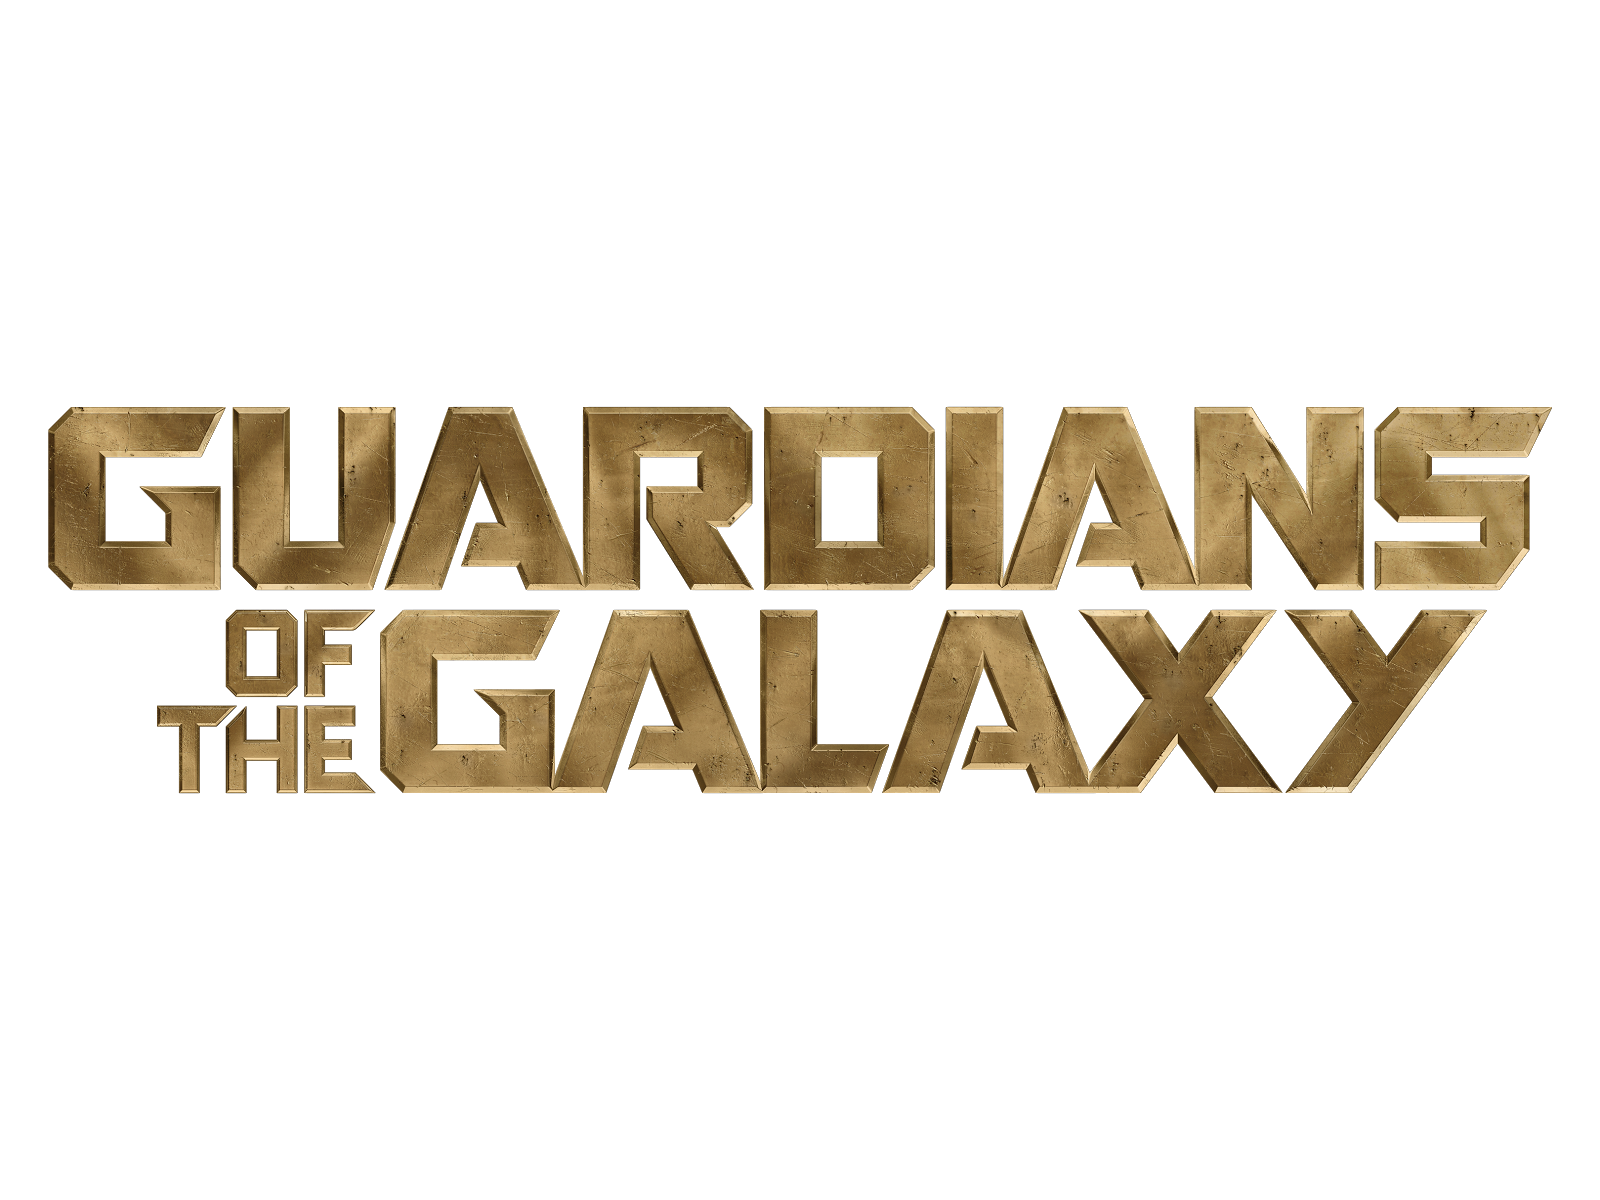 Guardians of the galaxy steam фото 98